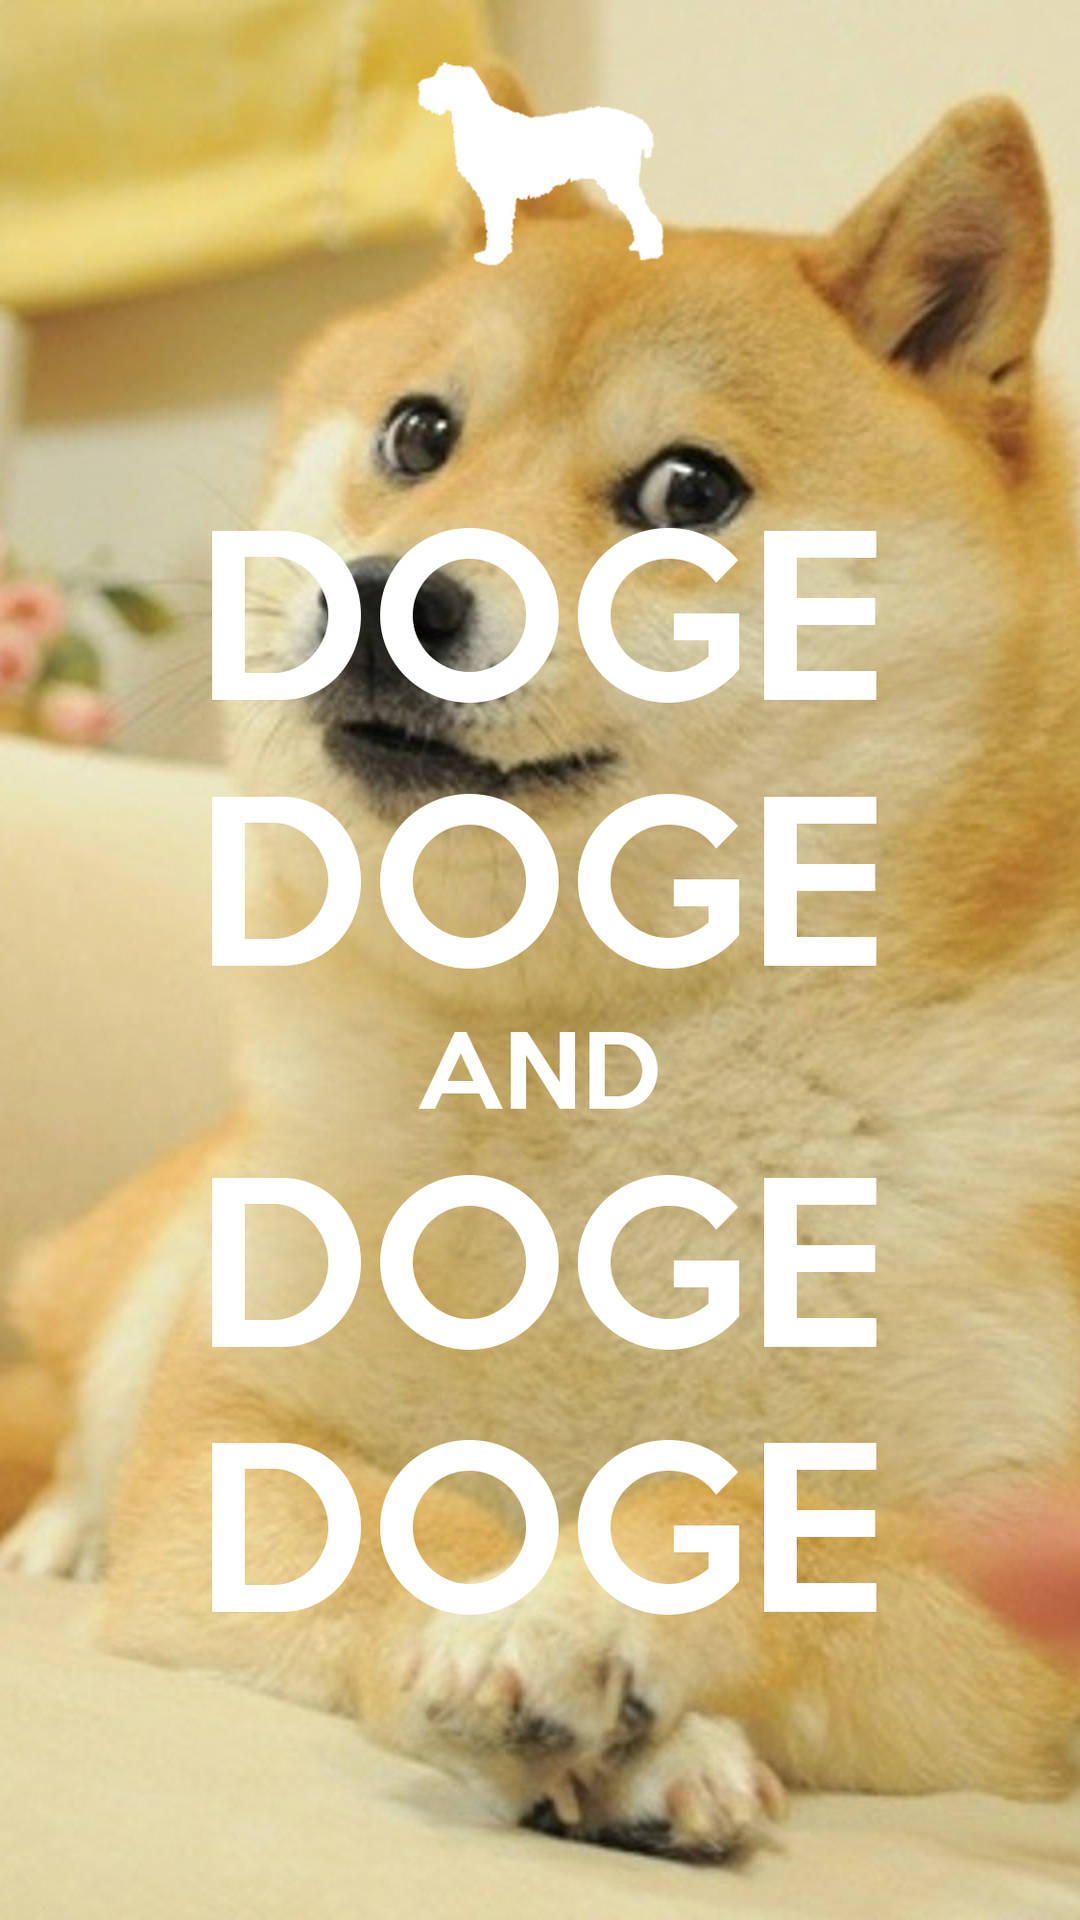 Doge Meme Inspirational Quote